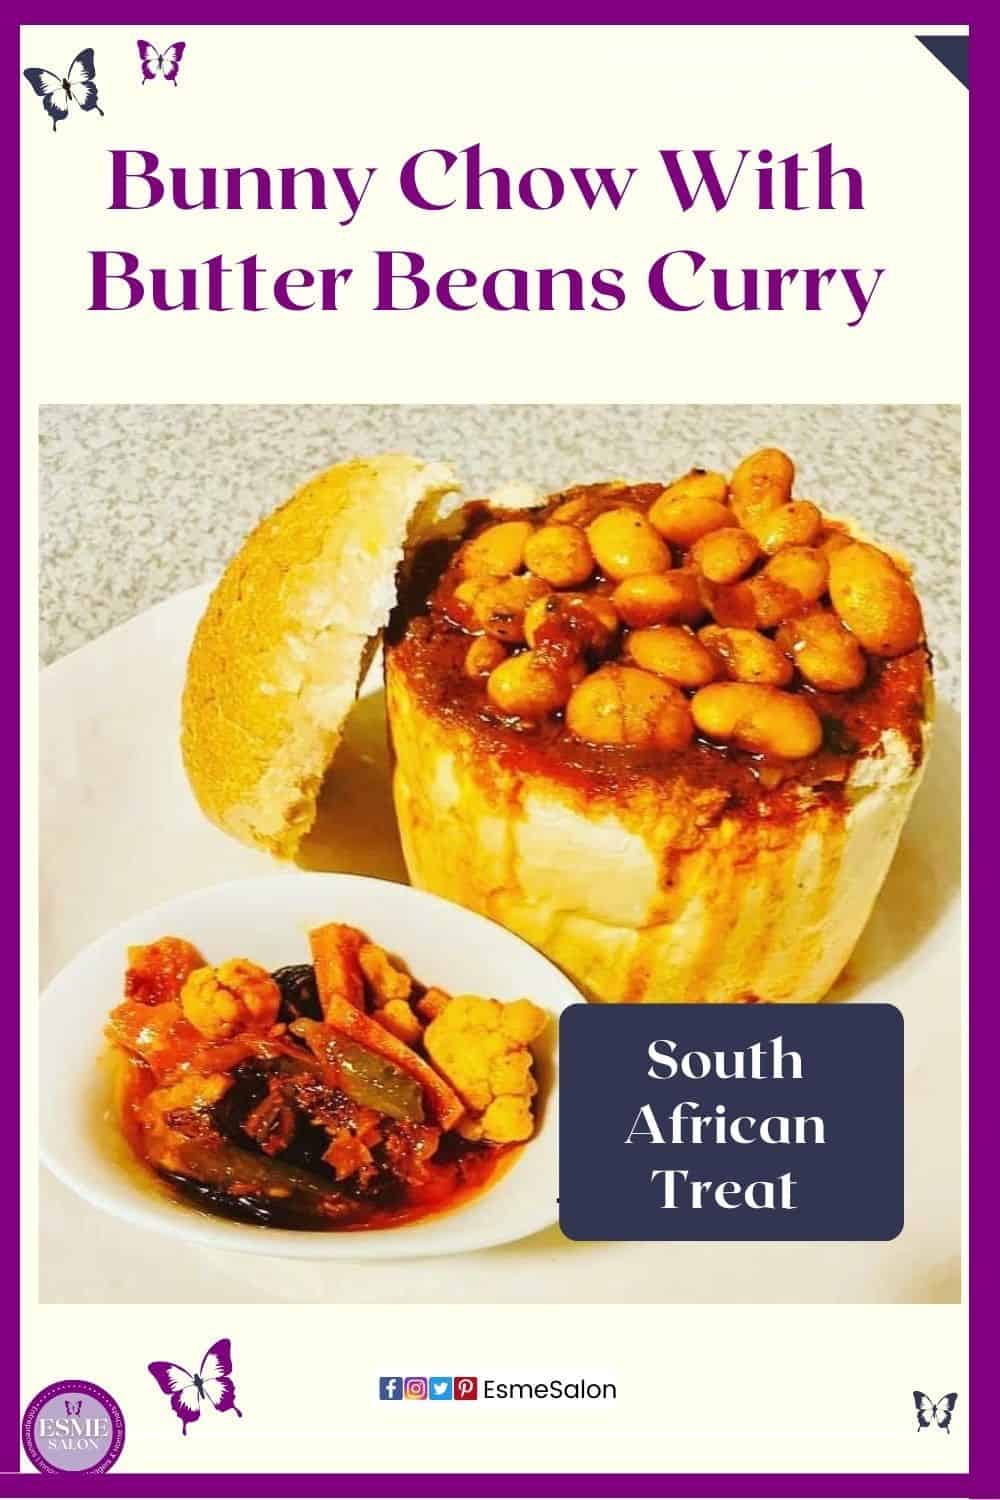 a image of a loaf of bread with top cut off and filled with Butter Beans Curry